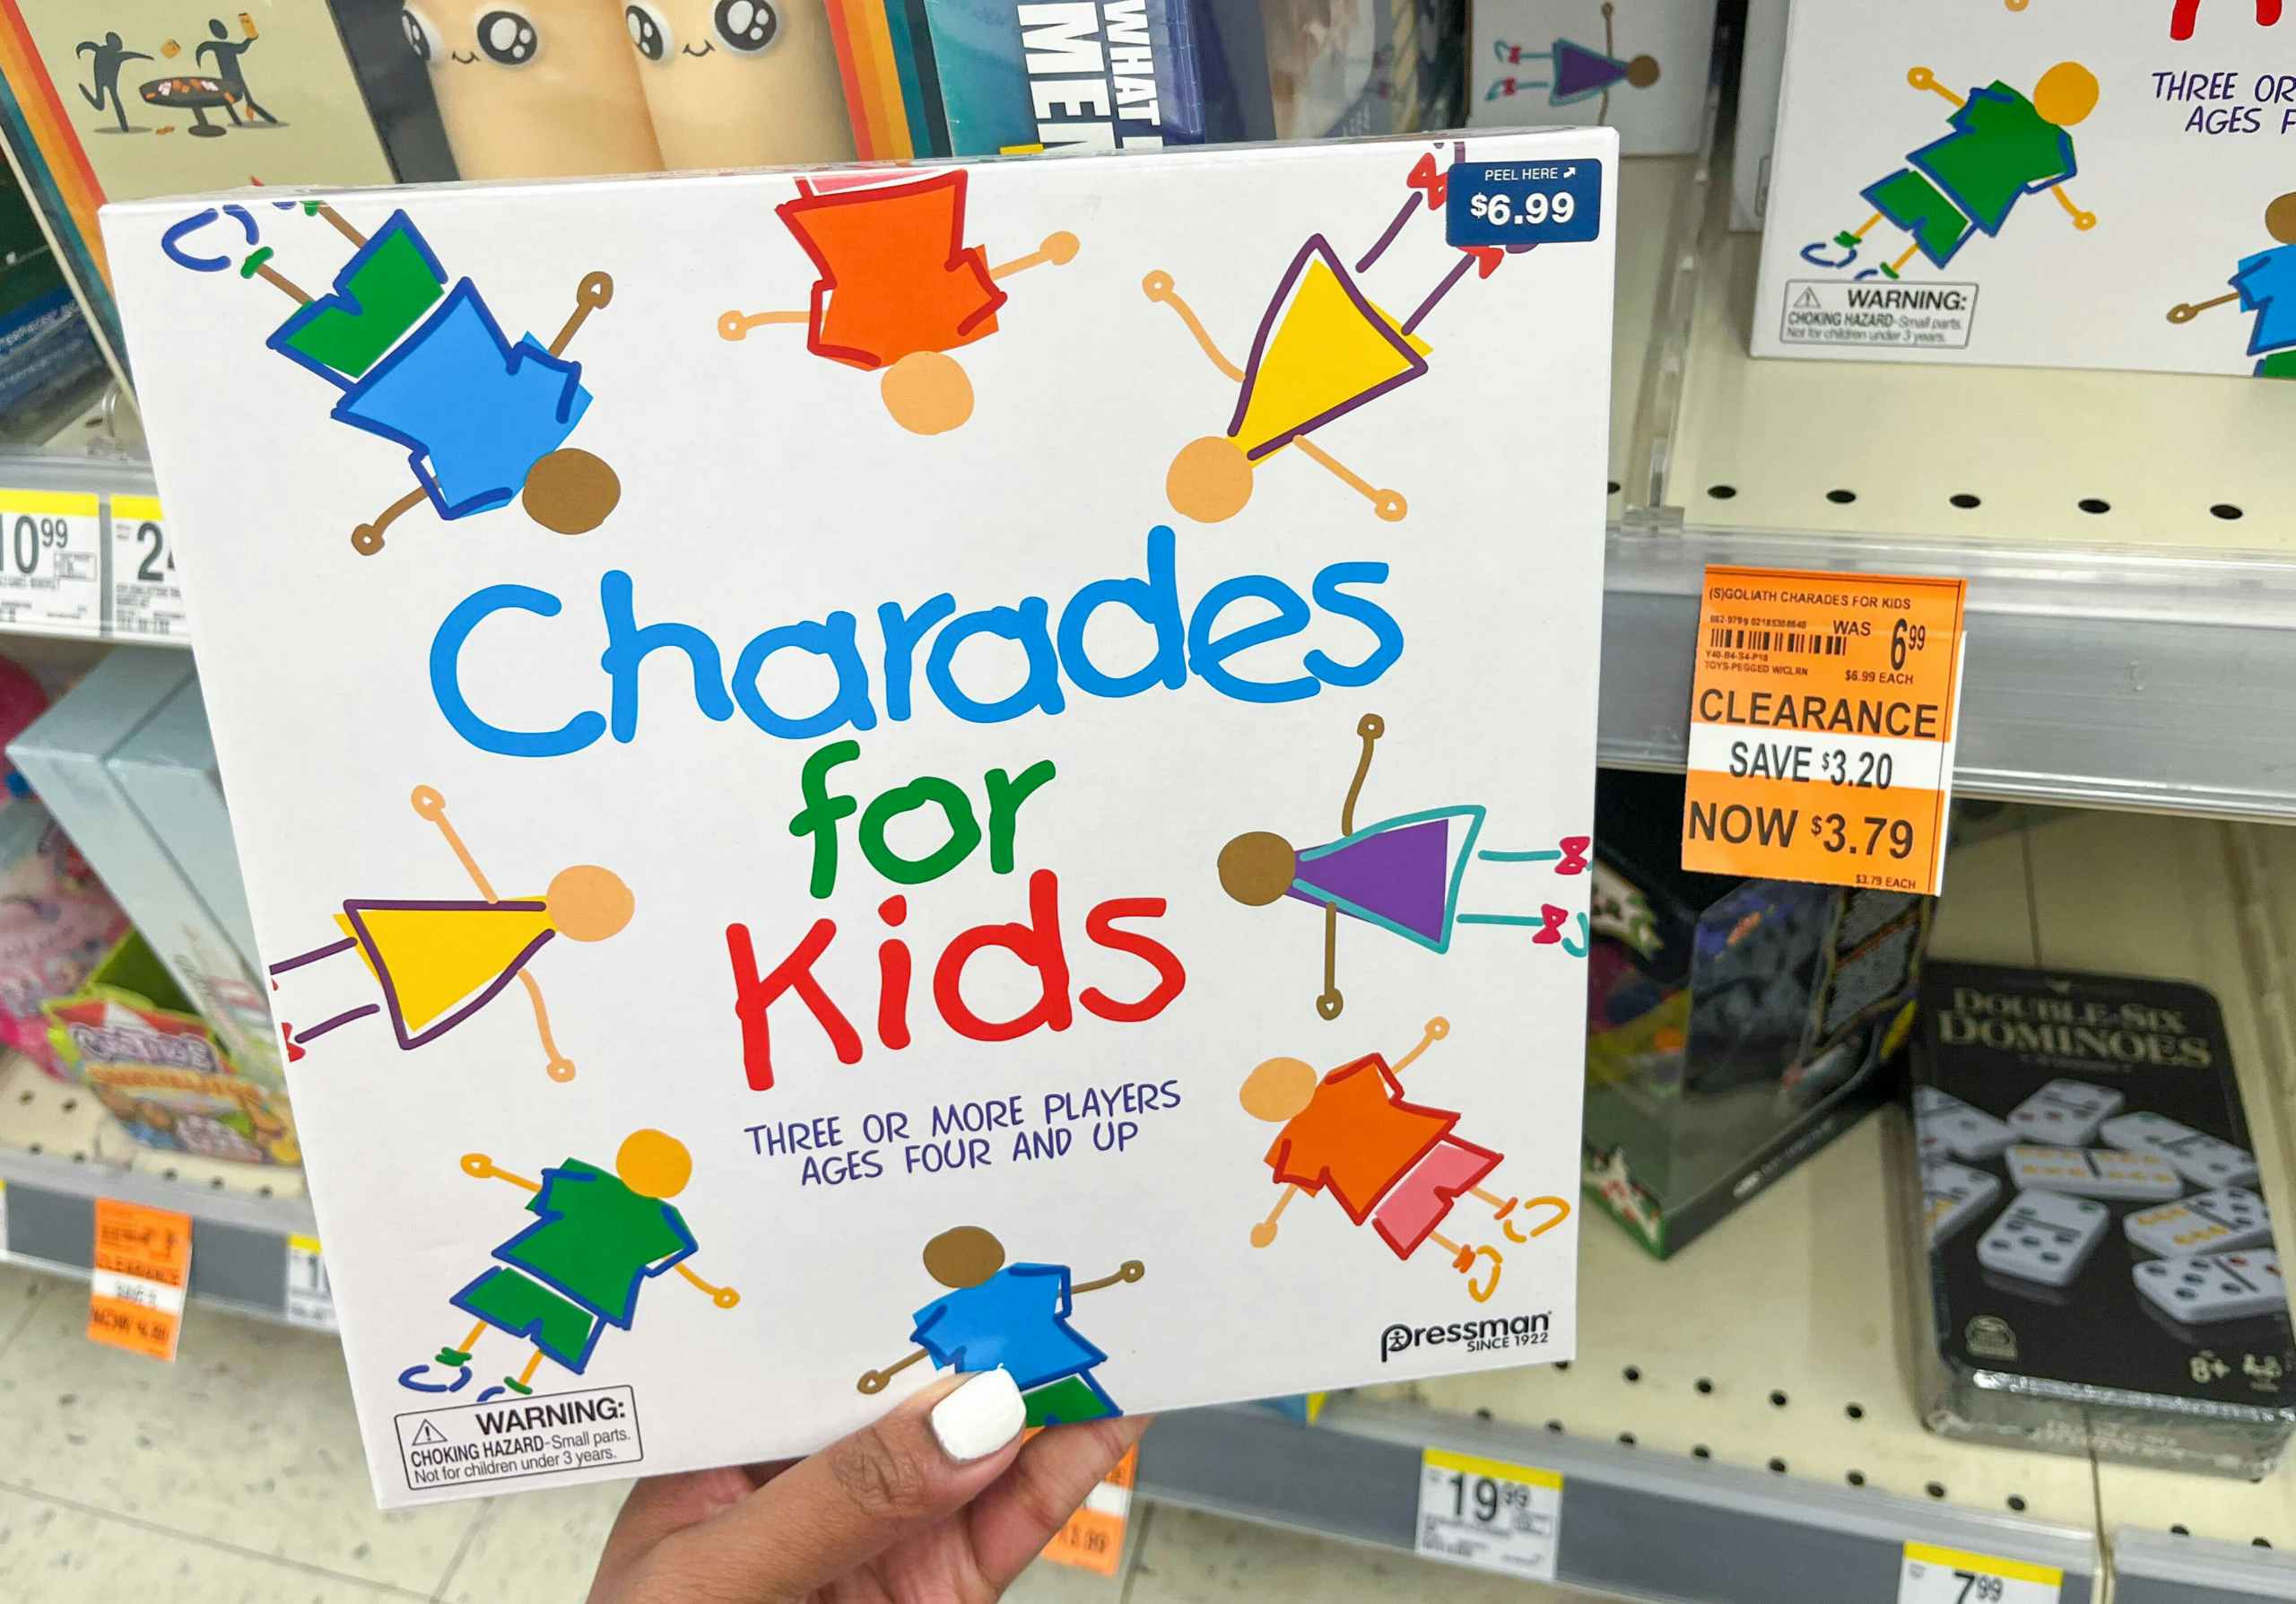 hand holding box of Charades for Kids next to clearance tag